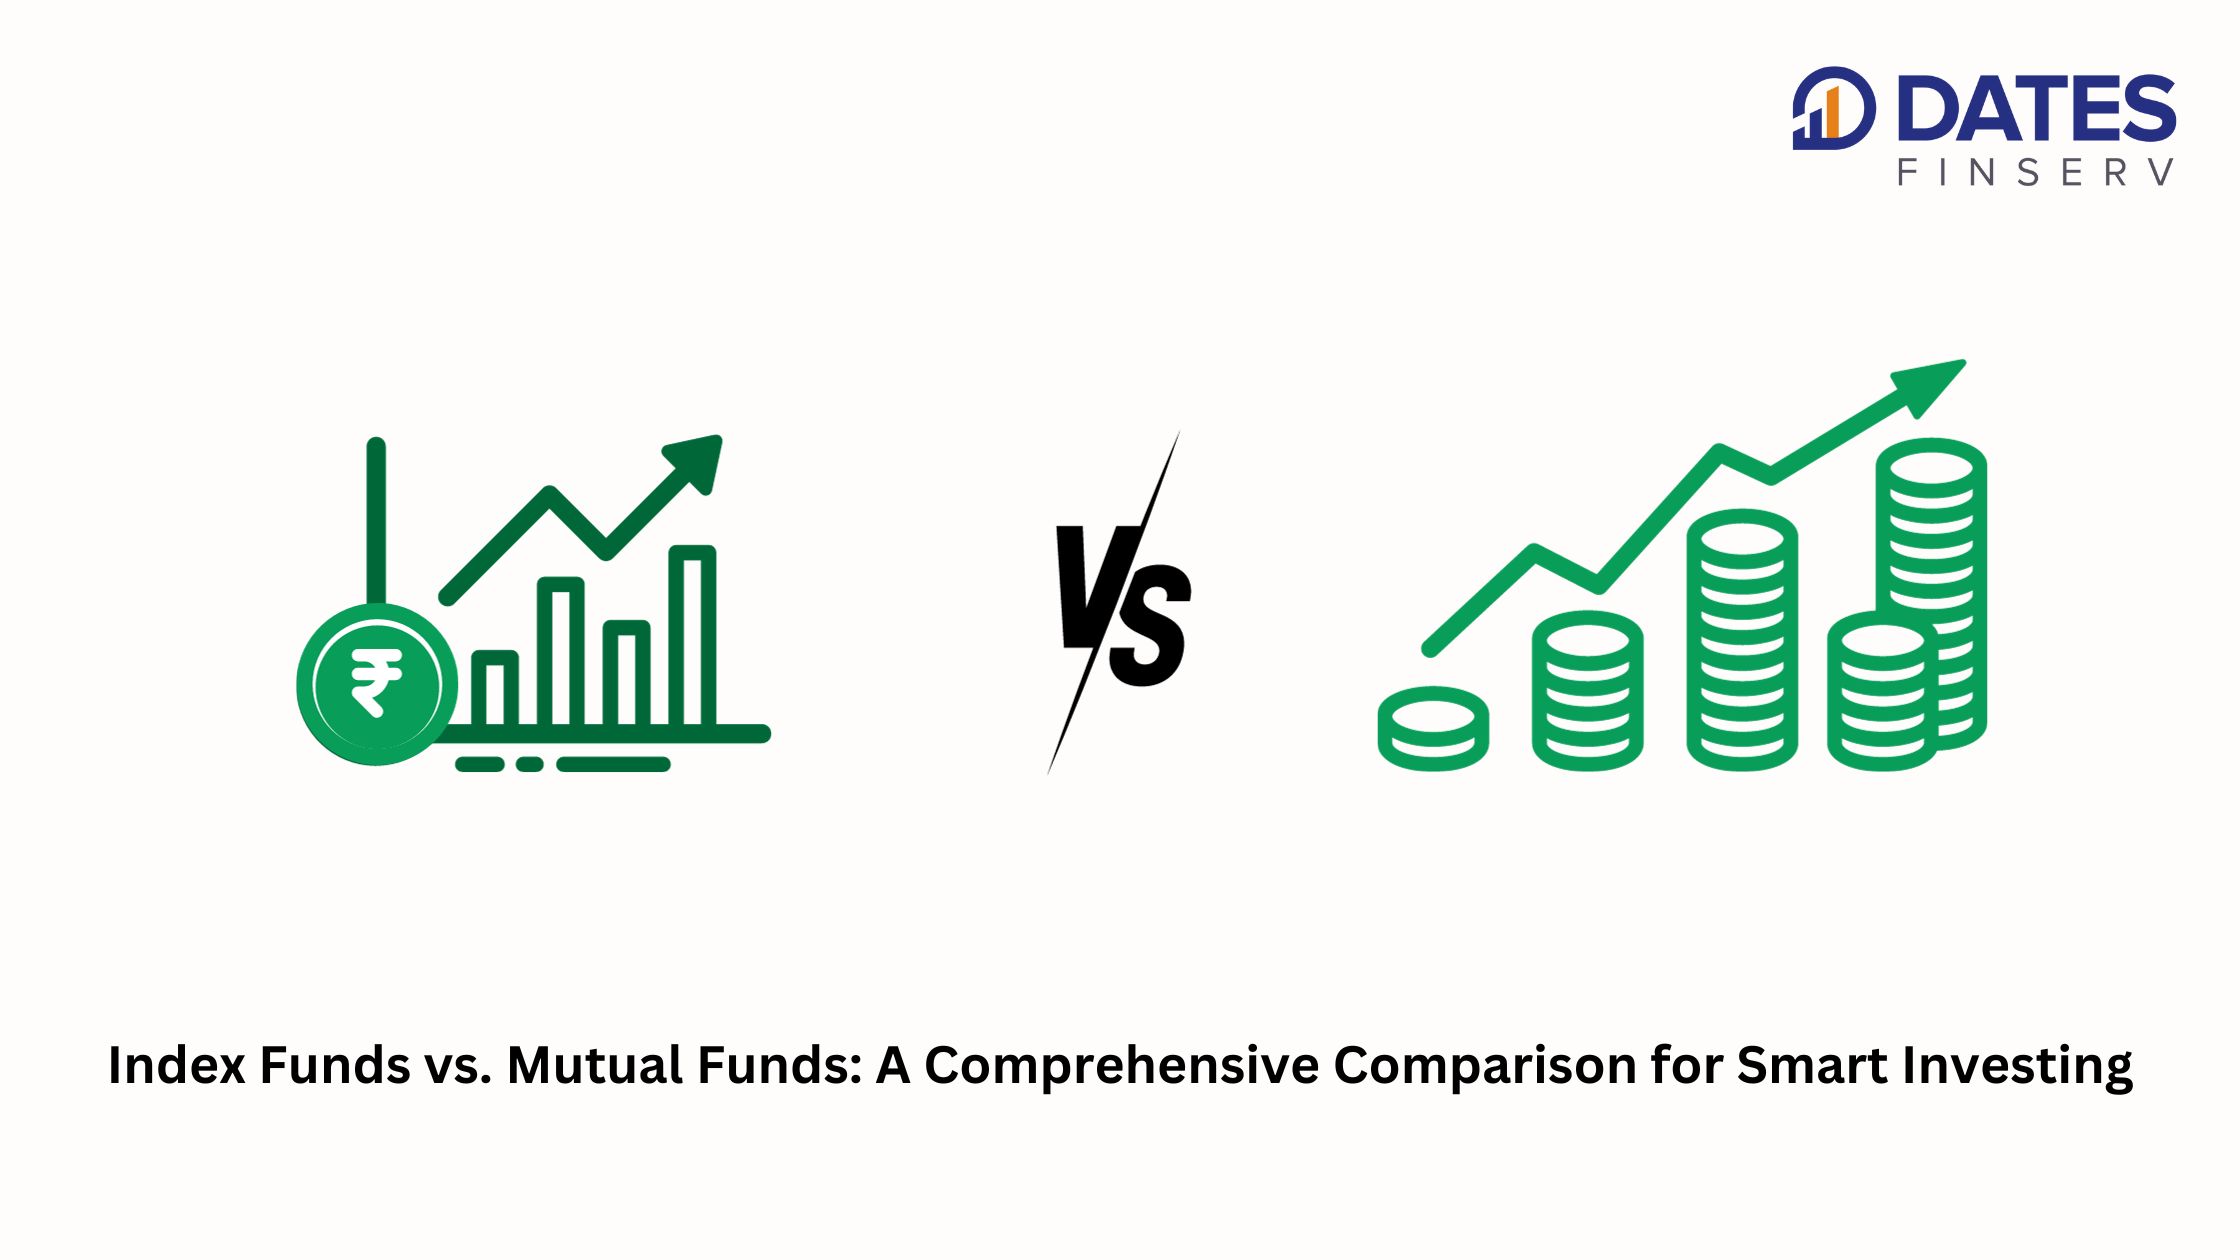 Index Funds vs. Mutual Funds: A Comprehensive Comparison for Smart Investing